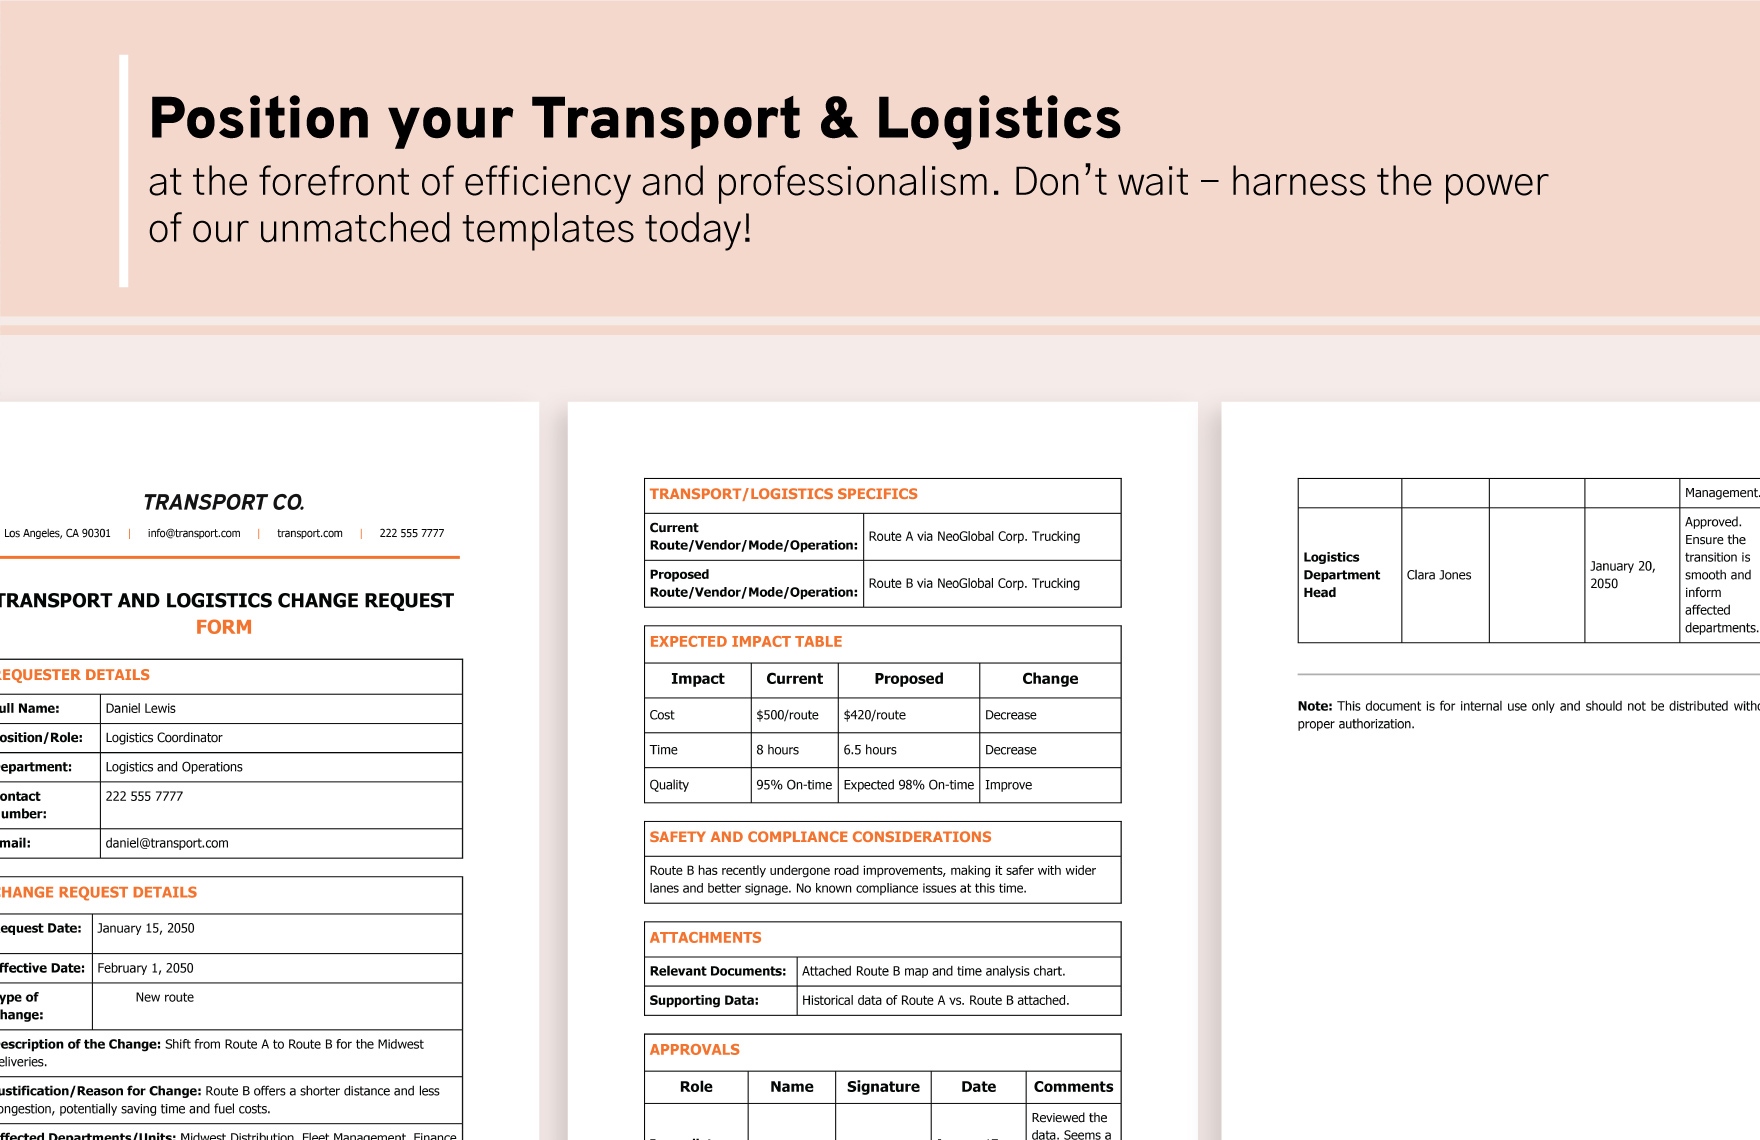 Transport and Logistics Change Request Form Template